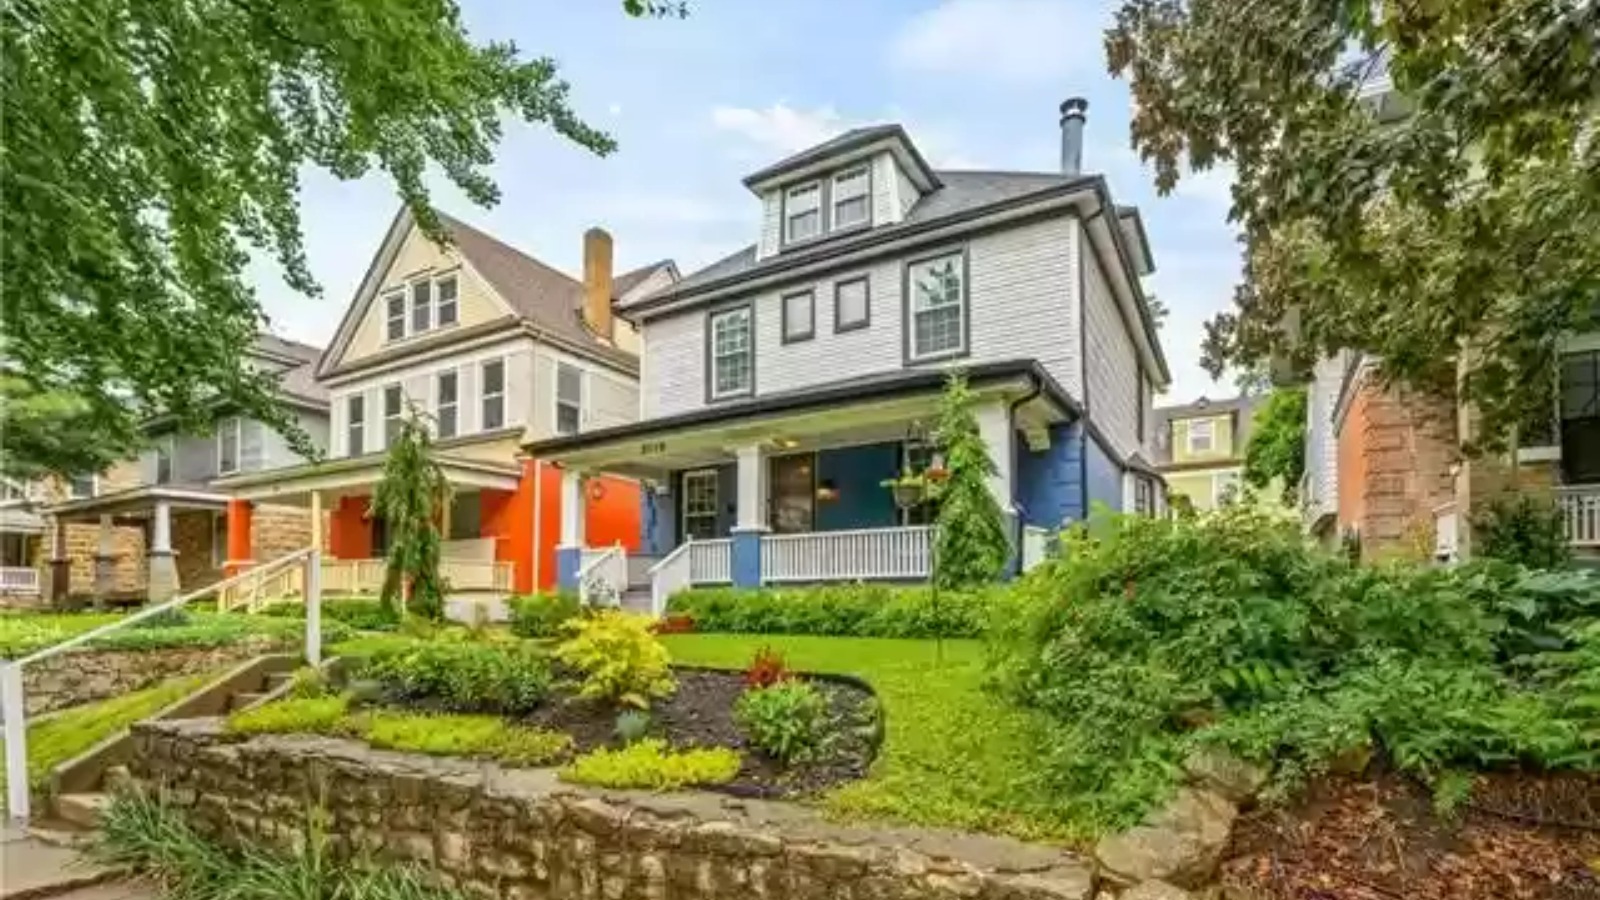 Peek Inside A Home From HGTV's Bargain Mansions On Sale For Only 389K